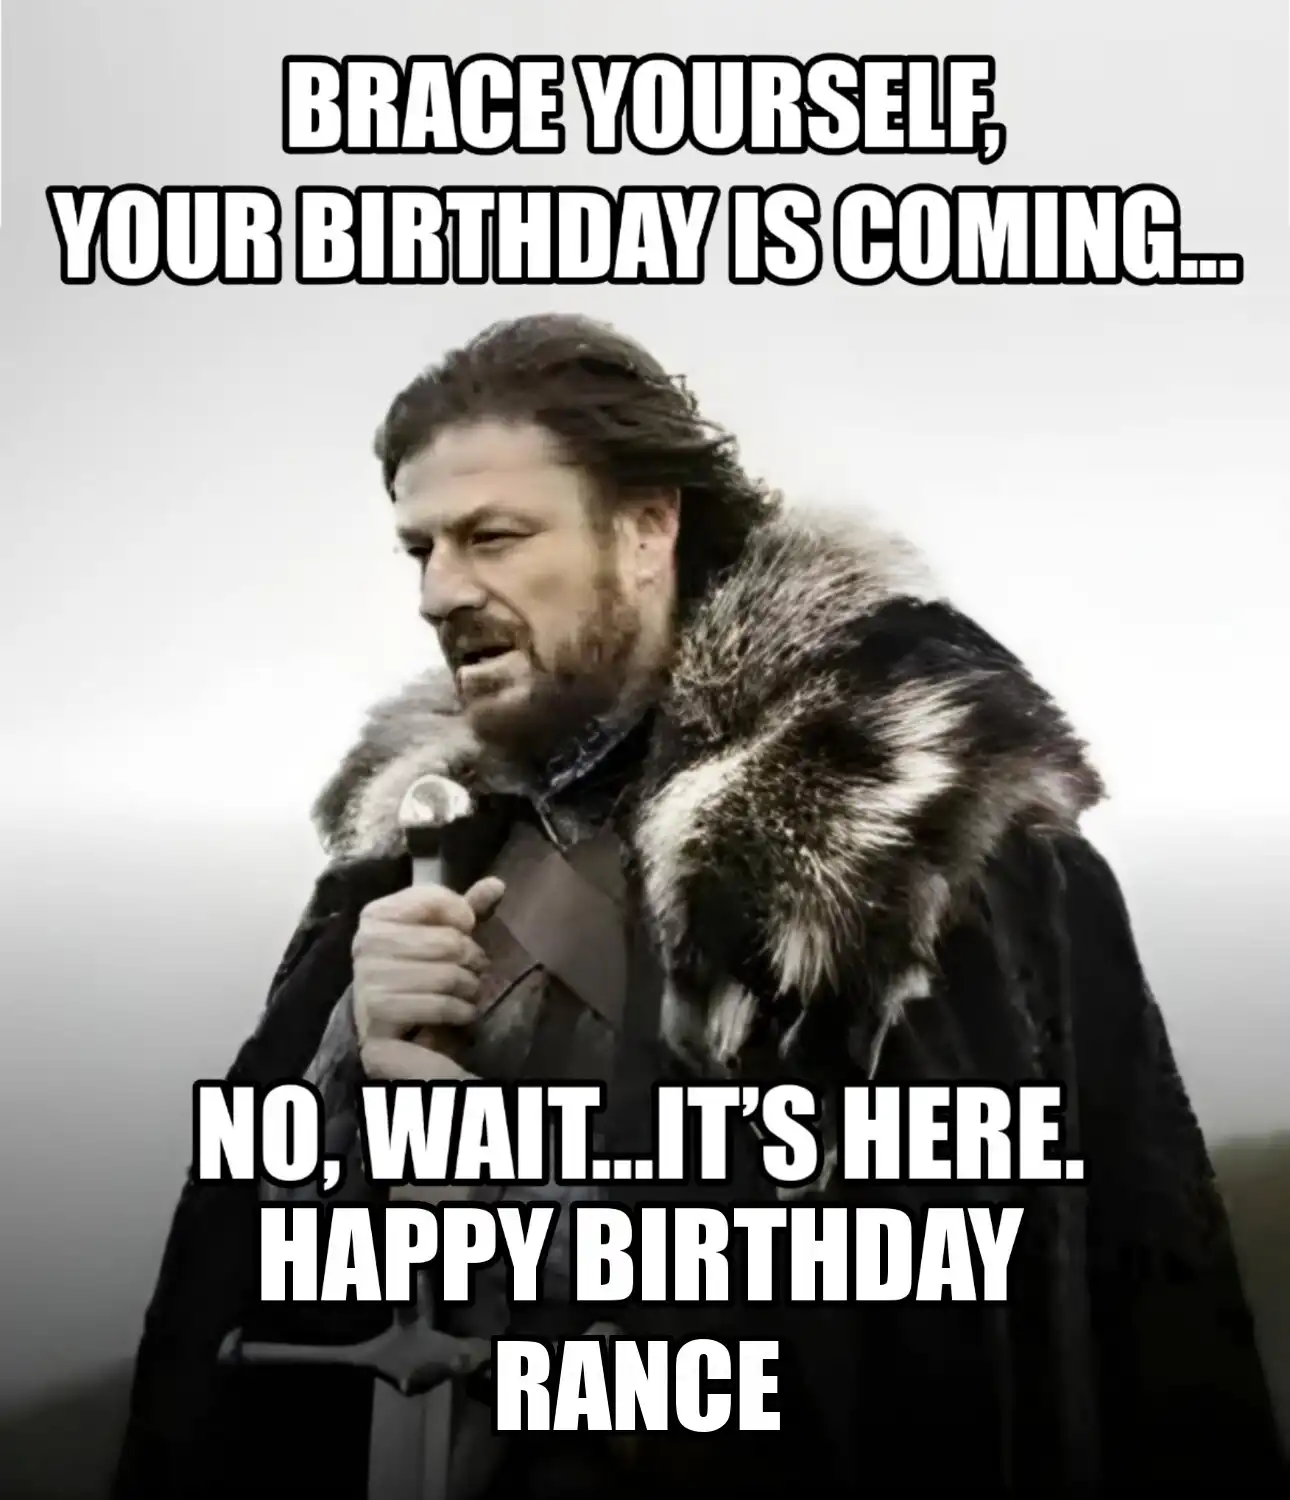 Happy Birthday Rance Brace Yourself Your Birthday Is Coming Meme